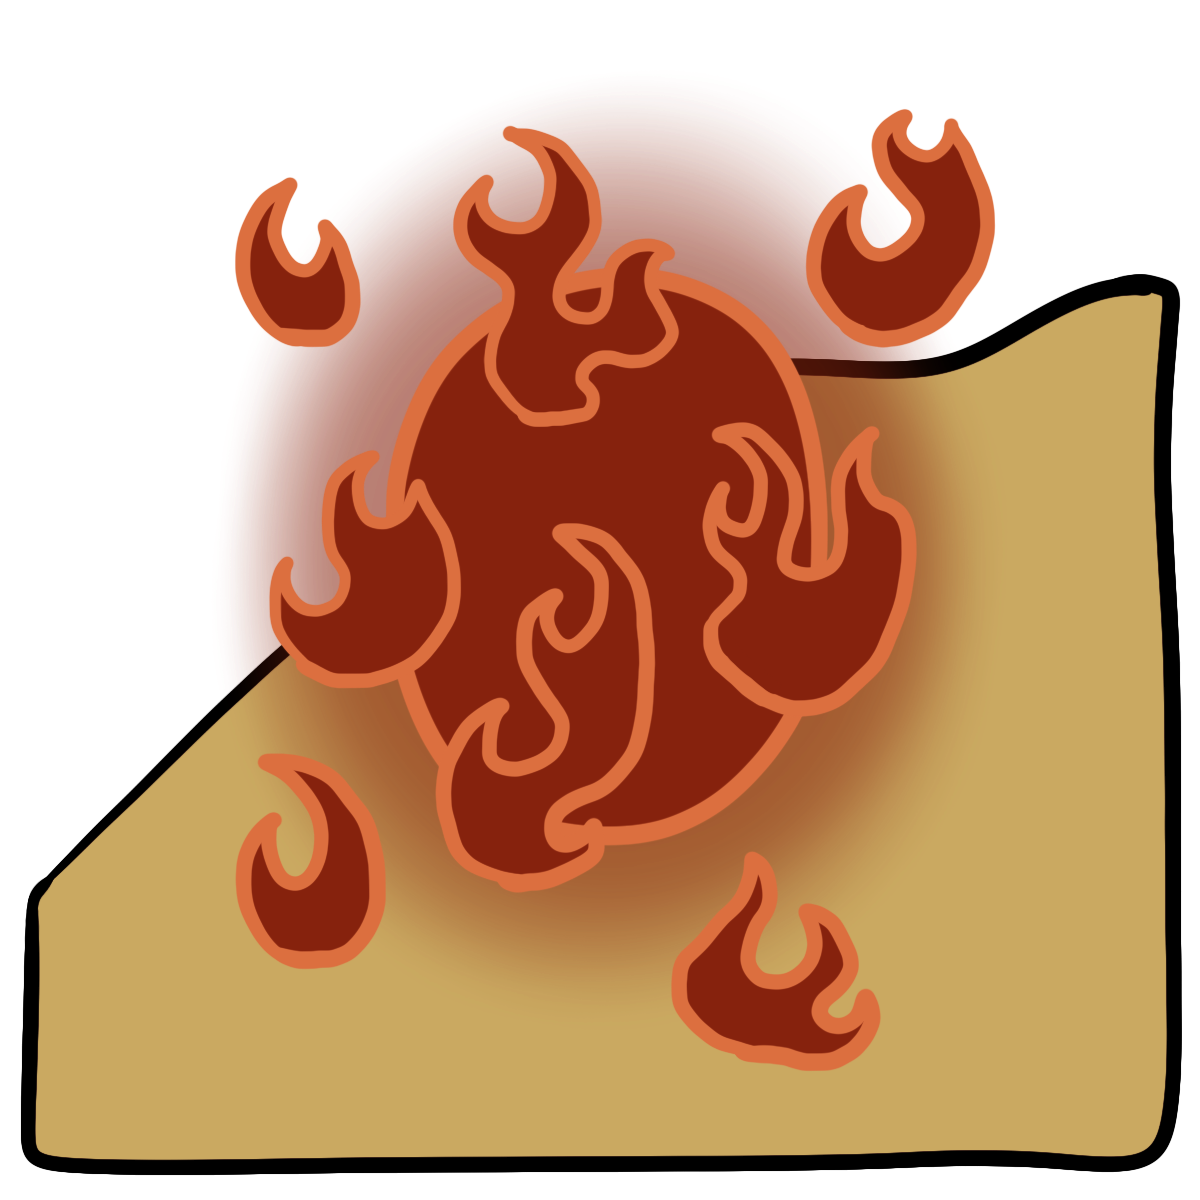 Orange-red oval with flames around it. Curved yellow skin fills the bottom half of the background.